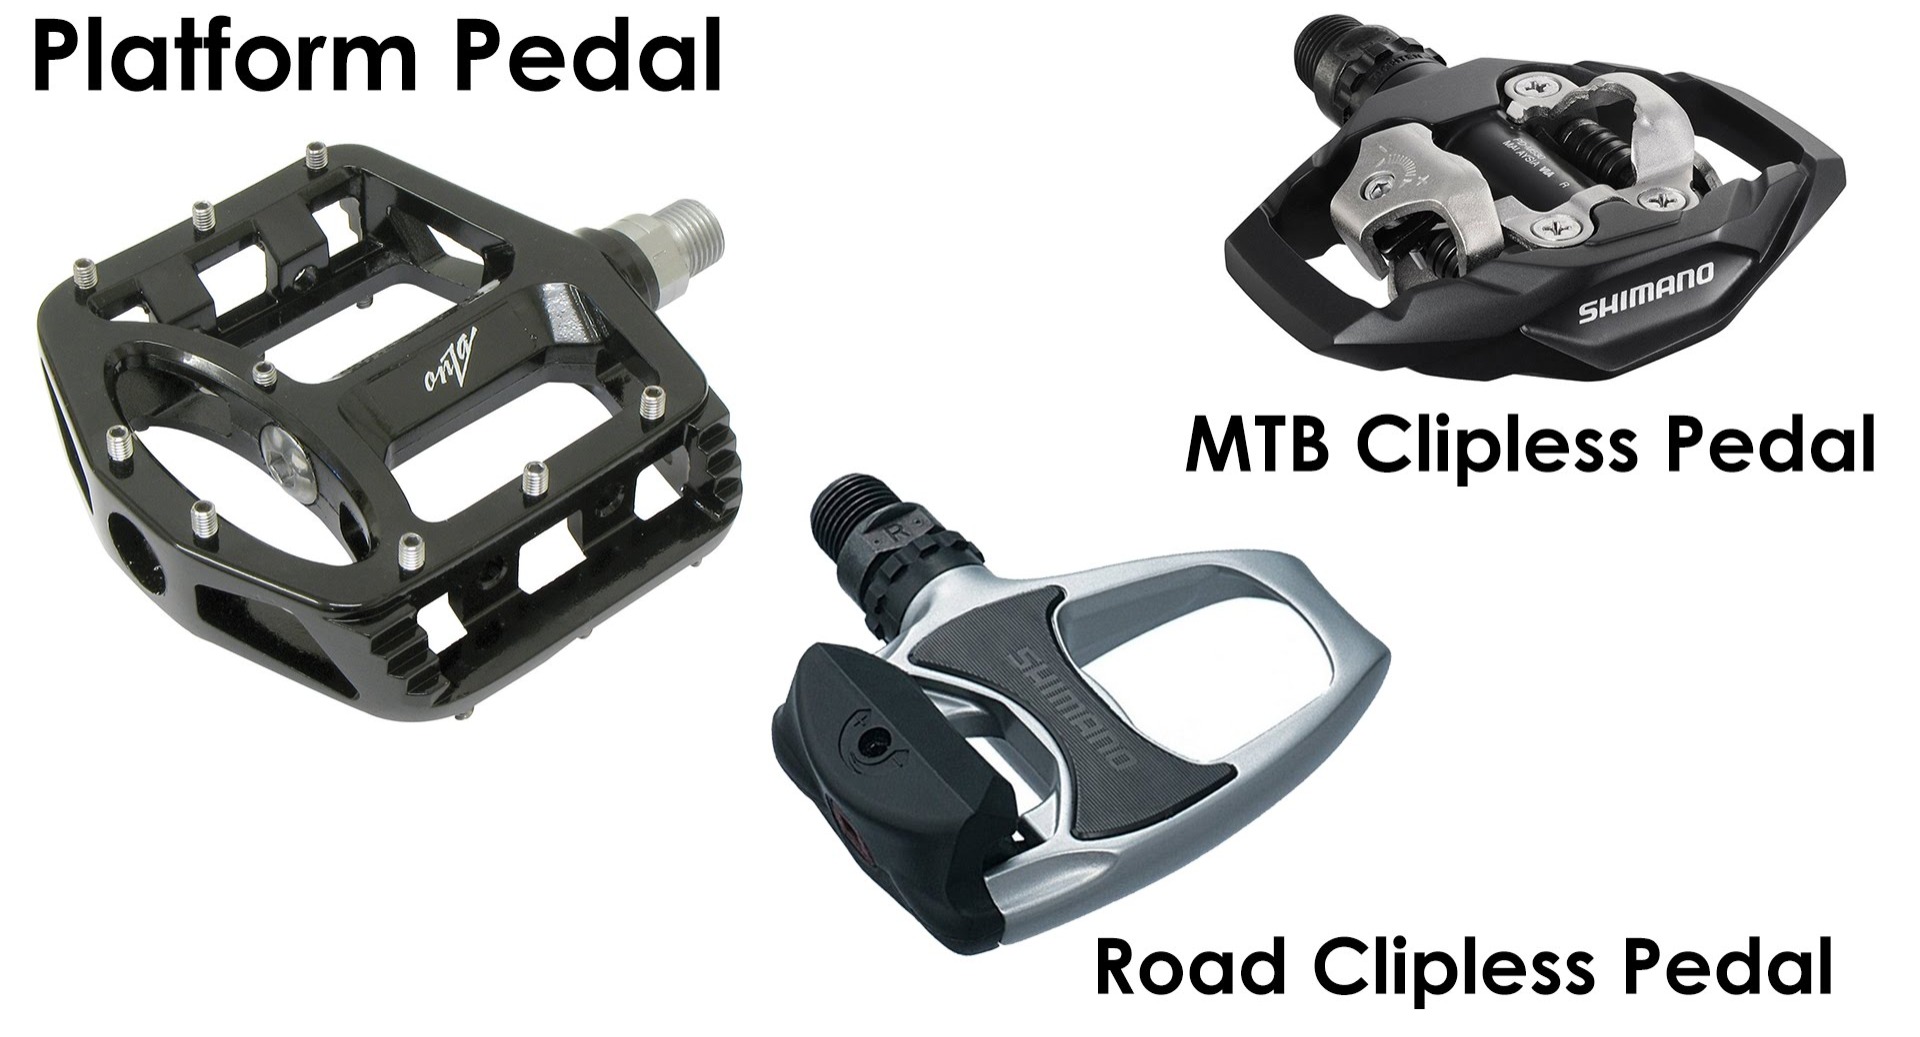 Opvoeding Rot Vertrek Clipless Pedals Guide | Everything You Need To Know - Dedham Bike